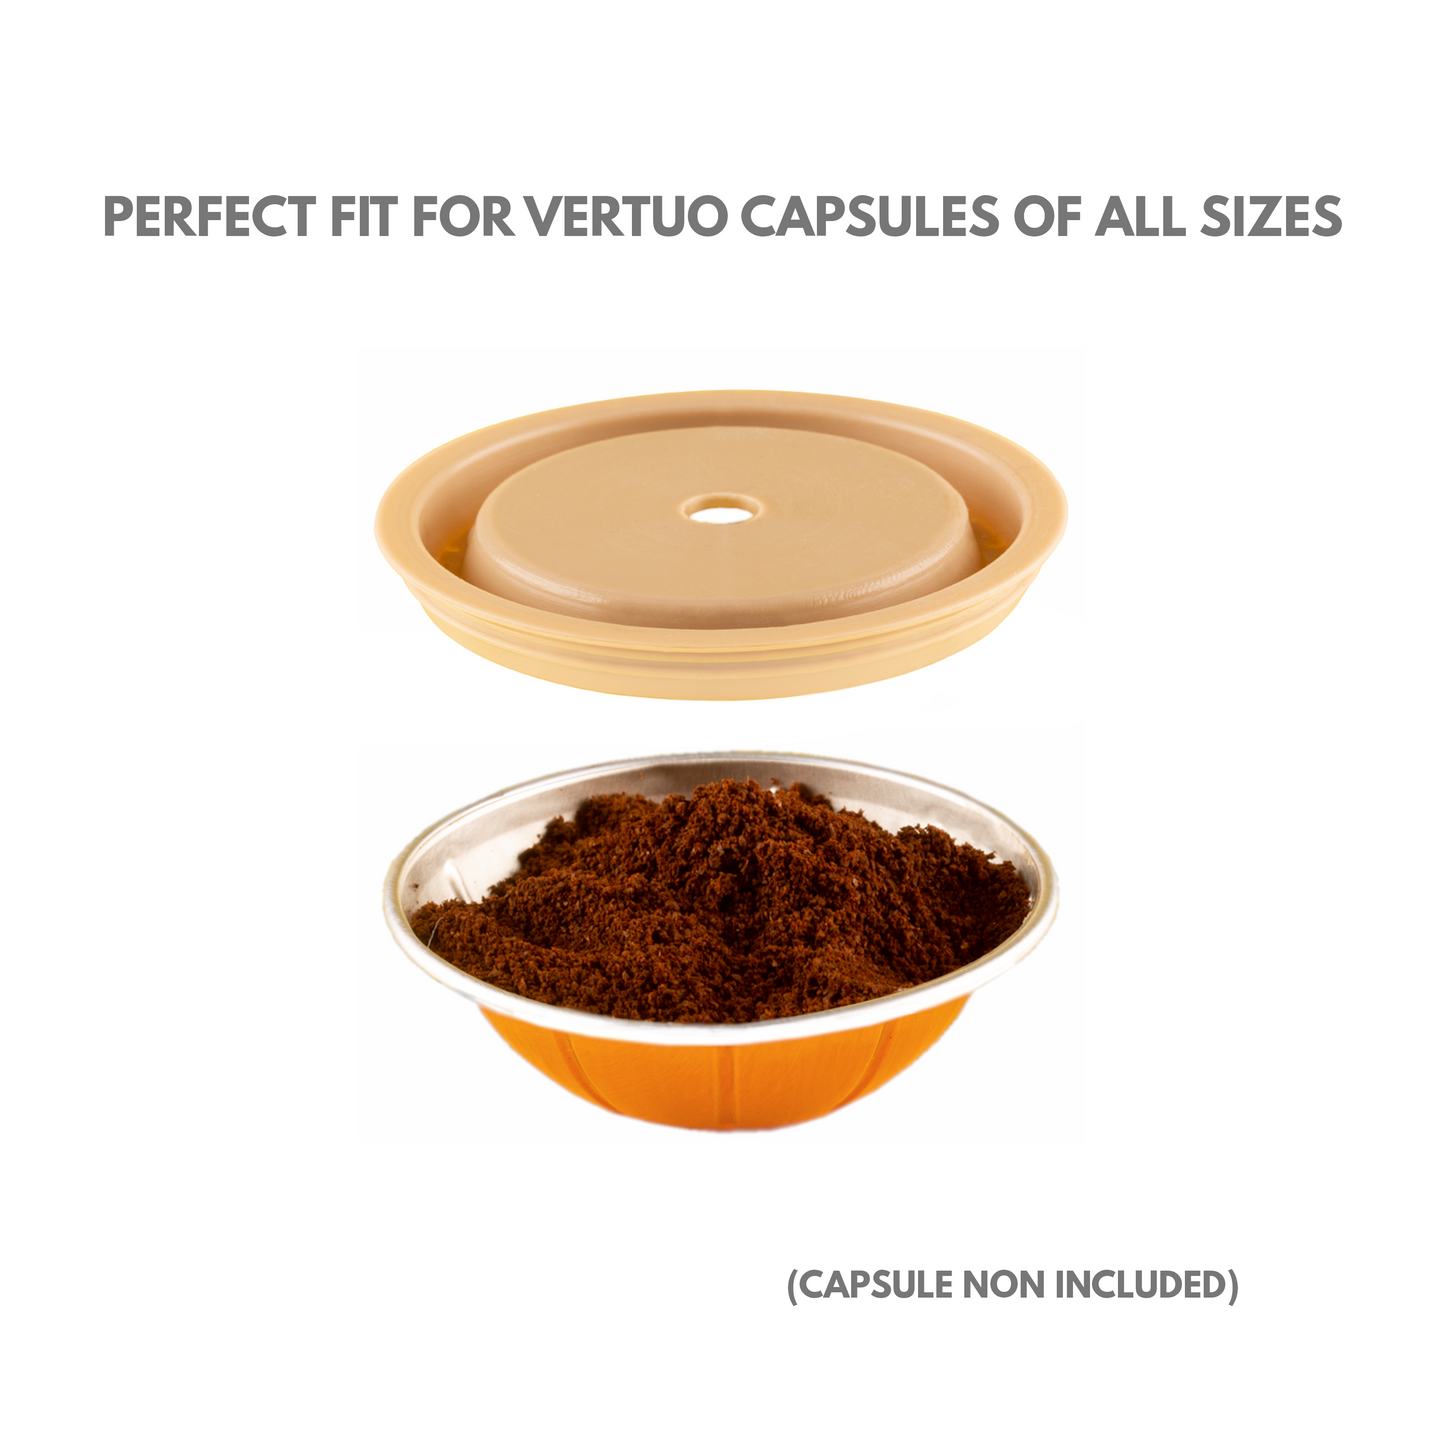 Reusable and Refillable Cap Compatible with Nespresso Vertuoline. Pack of 2 Caps